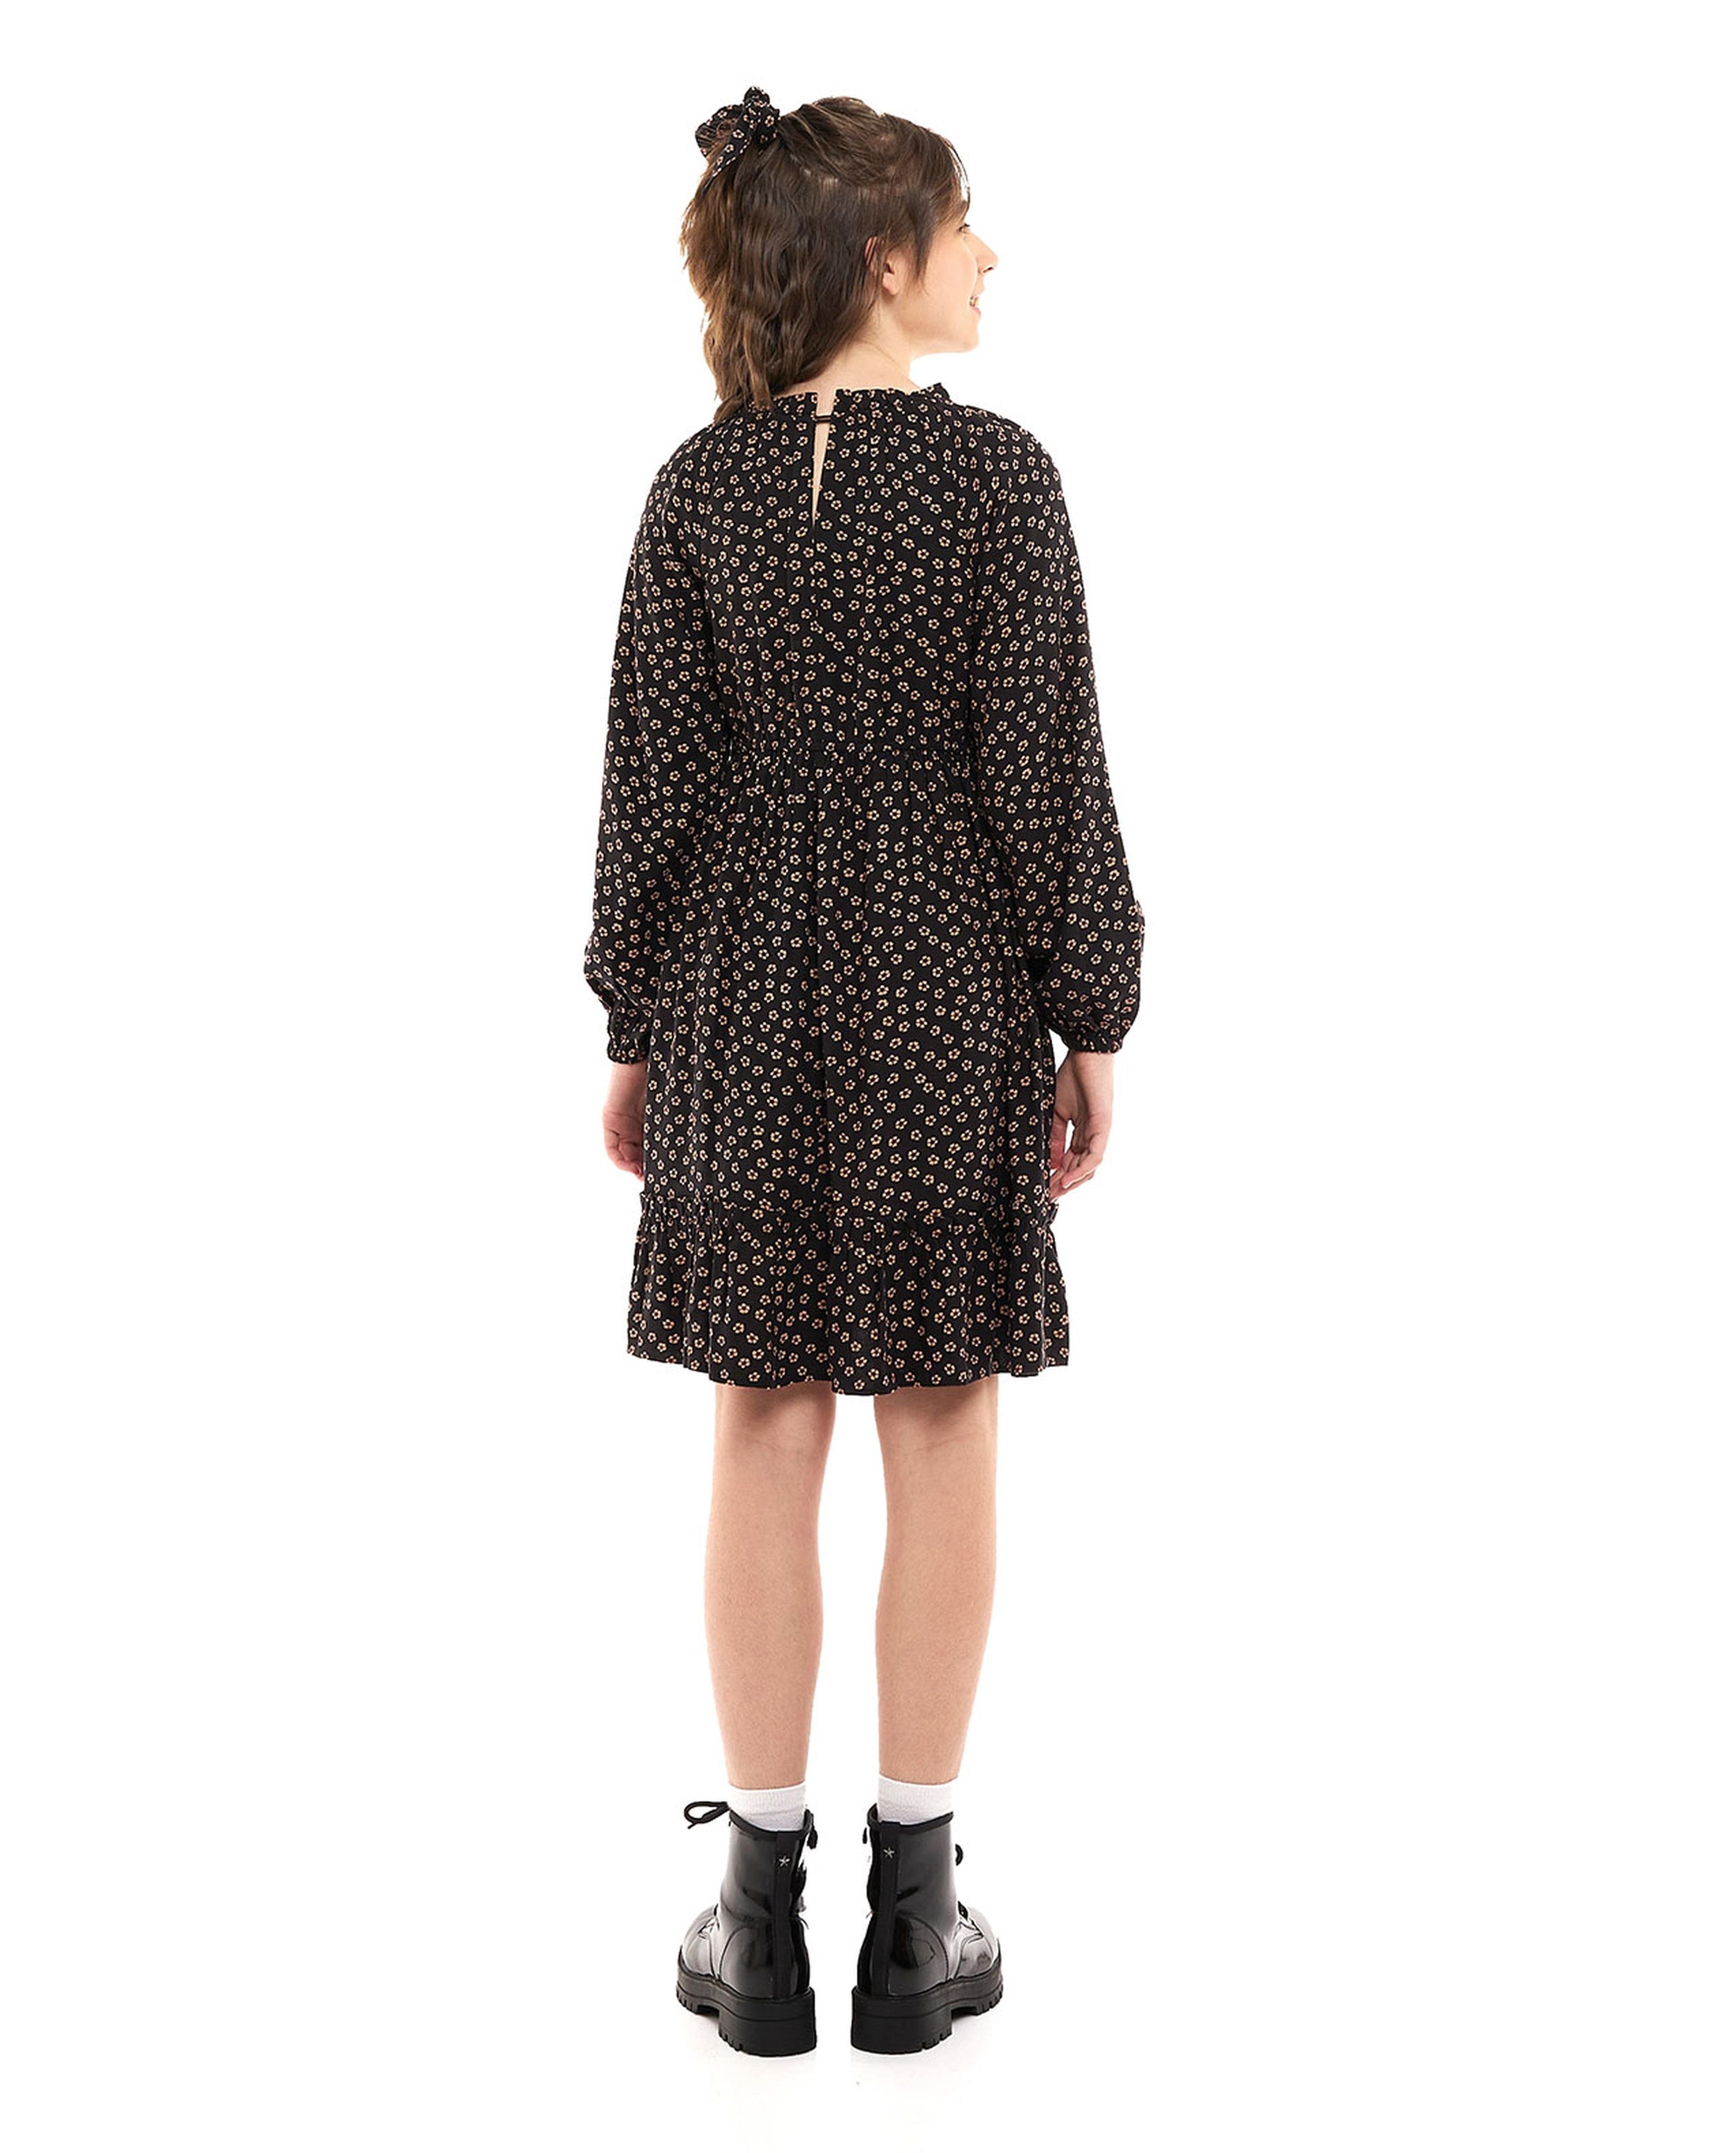 Patterned Dress with Crew Neck and Bishop Sleeves